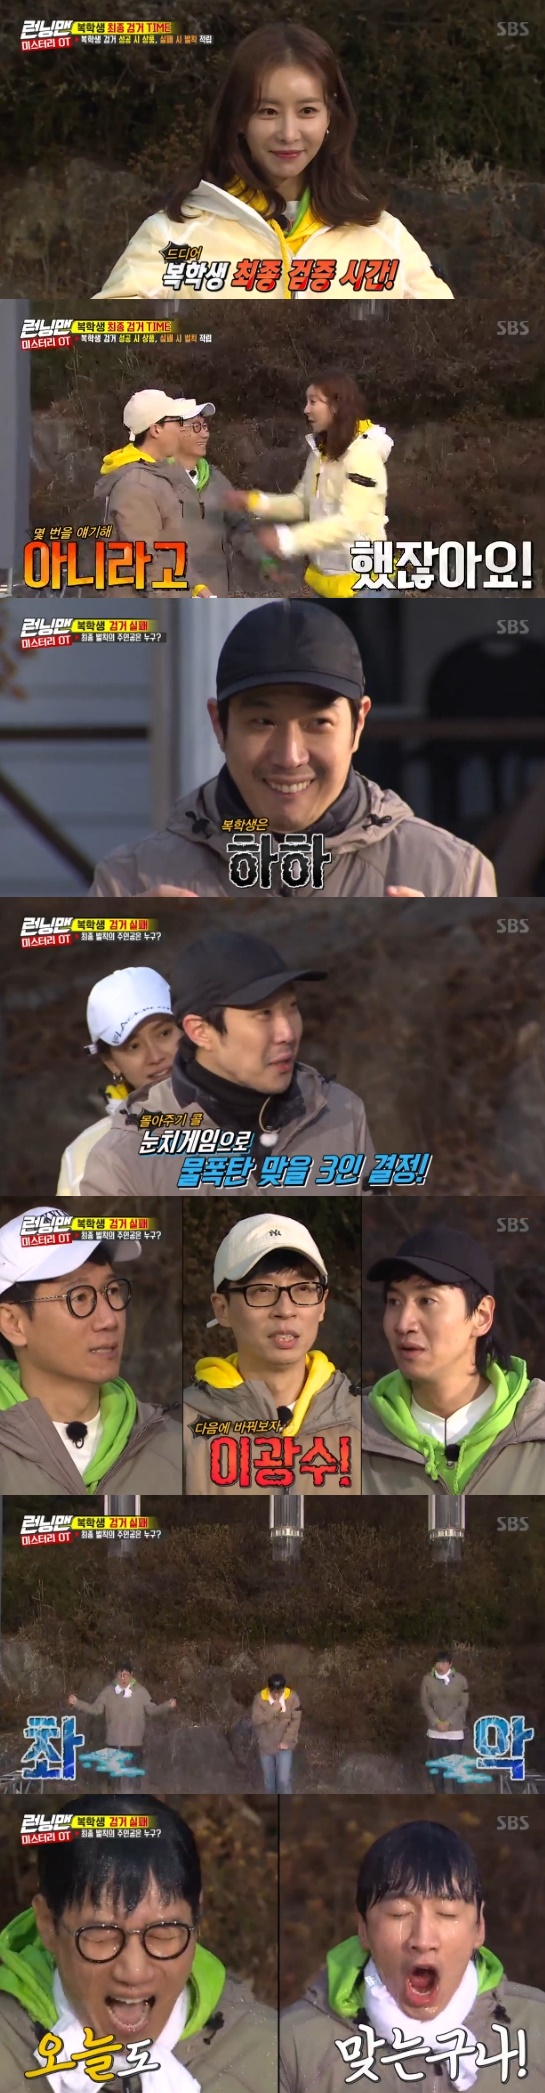 The Running Man return student was identified as Haha, while Yoo Jae-Suk, Lee Kwang-soo and Ji Suk-jin were hit by a water bomb.On the 10th broadcast SBS Good Sunday - Running Man, Hangam, Kim Shin-rok, and Hong Jin-young appeared and played a returning student race.When the 2019 freshman orientation began, Lee Kwang-soo said, Girls.Hi, he said nicely, but other friends laughed at me for giving me a pin to not talk about it from the beginning.Yang Se-chan then simulated Gregs vocals on the demand to show his personal period; Jeon So-min said, I want to have a lot of meetings.Also, Ji Suk-jin introduced everyone as a fast 99-year-old and confused them; other freshmen Hong Jin-young, Kim Sae-rok, and Han Da-gam also appeared.It was a mystery returning student race, and among the 11 students, it was a race to find a returning student who followed the freshman Chuck O.T.The returning student performs every round Hidden mission, and the freshman must find the returning student after obtaining the hint.The first game was a water game, which required eating the Kalamancy undiluted solution if caught; among the Insider Game, they played orange Game, orange fart Game, and K-pop Game.Yang Se-chan, who never drank a glass of Kalamancy at the end of the game, has won a penalty waiver.The second round was a three-sided Zimball foothill with lunch. If you dont get the ball - one point, - the team with 10 points was last.The first team could eat pork belly, the second team could eat rice and steam, and the third team could not win the first prize in the Hidden mission of the round.At first, Lee Kwang-soo was noticed by successive mistakes, but Kim Jong-kook, Haha, and Hana were suspected as the game progressed.In the final round, Yang Se-chan and Hong Jin-young, Kim Jong-kook and Song Ji-hyo, Haha and Kim Sae-rok, Lee Kwang-soo and Jeon So-min became a couple.Yoo Jae-Suk chose Ji Suk-jin instead of the most suspicious of returning students; after the final round, the crew revealed that the returning student used the old terminology.The members speculated that Haha was a returning student, but the returning student was Haha; the penalties were received by Lee Kwang-soo, Yoo Jae-Suk and Ji Suk-jin.Photo = SBS Broadcasting Screen